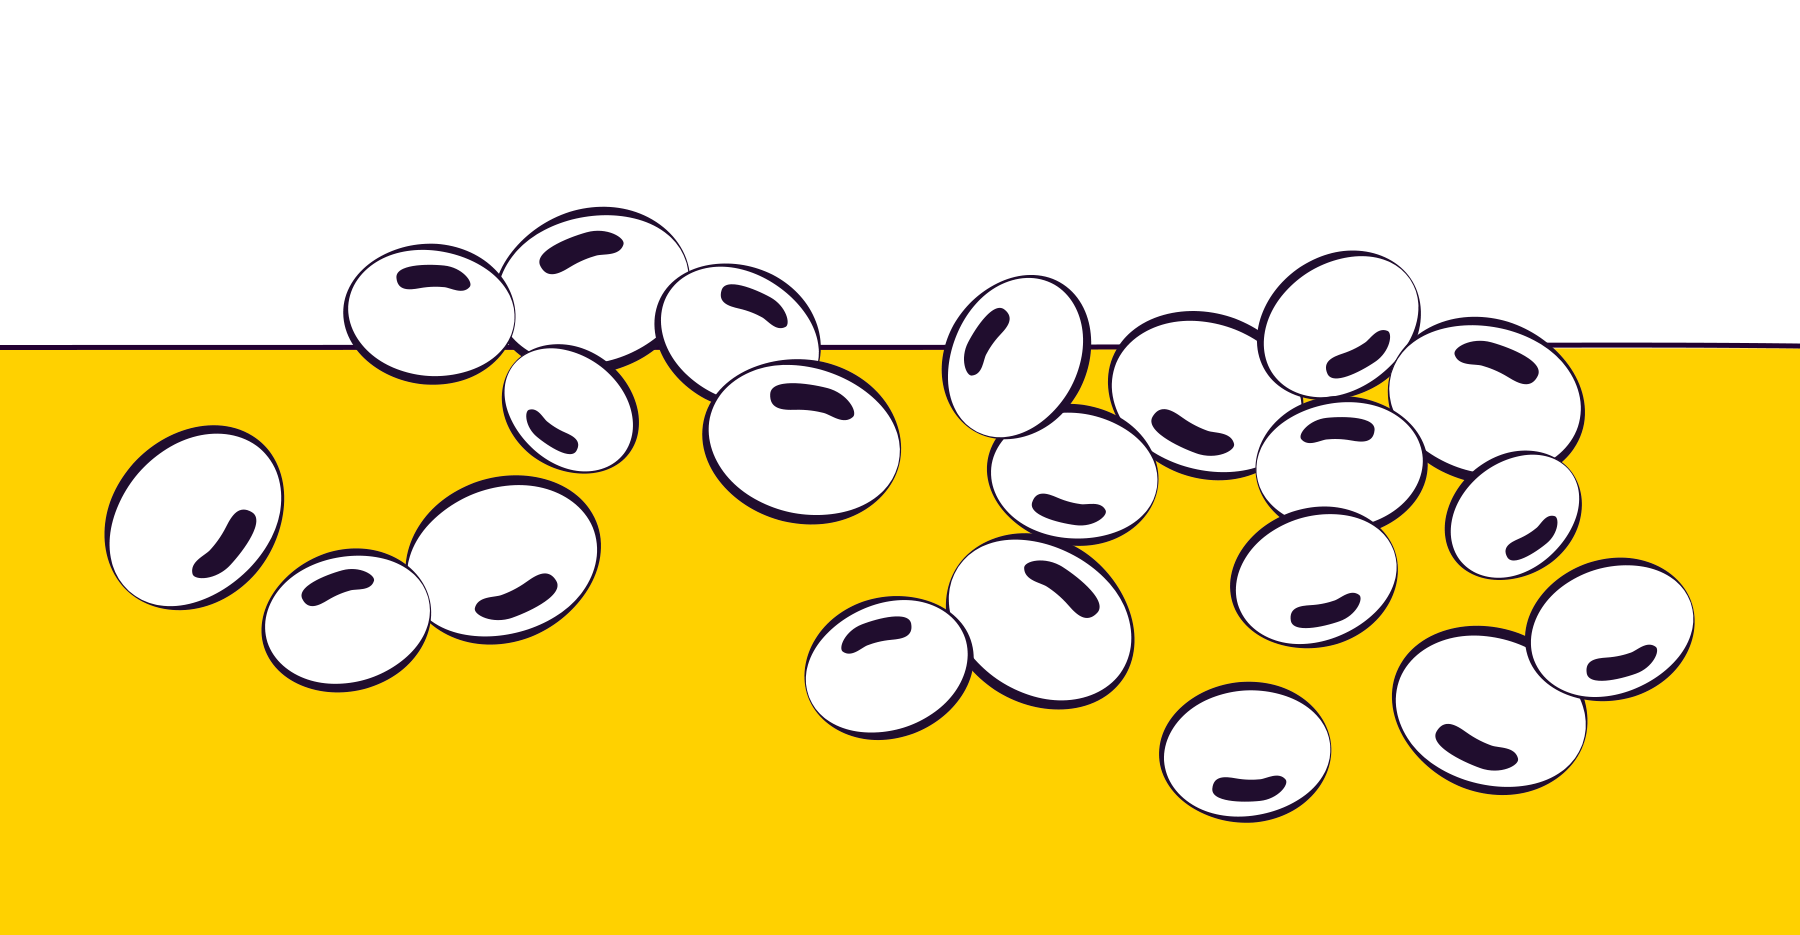 An illustration of some soy beans on a yellow background